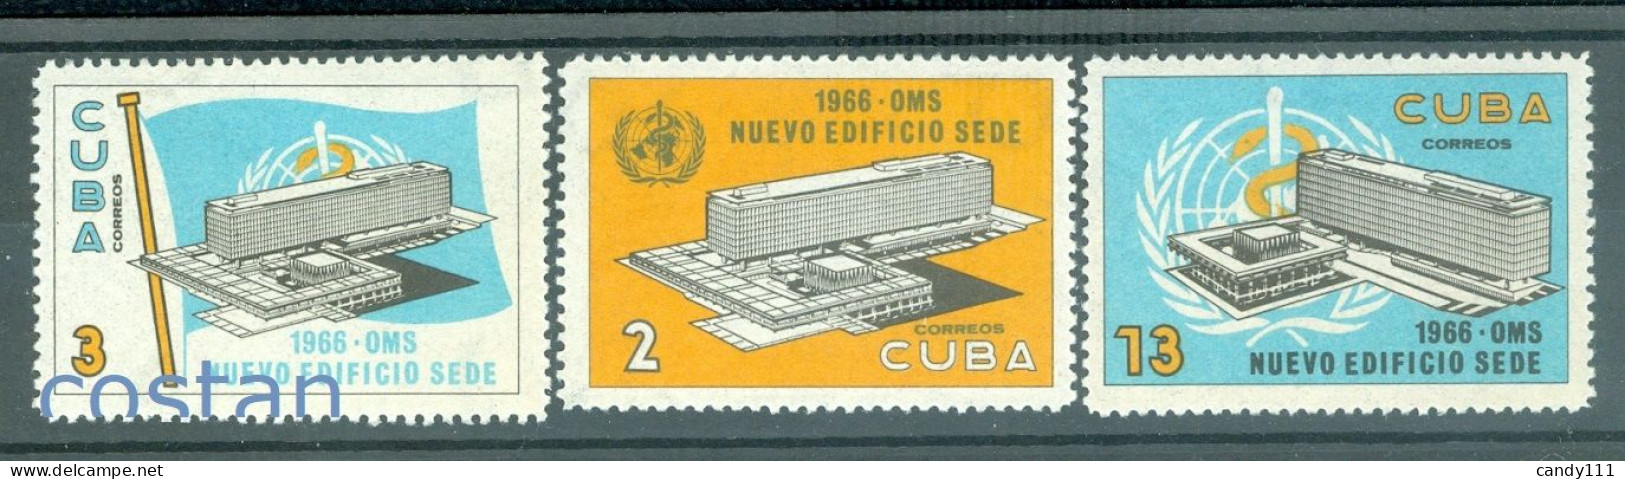 1966 OMS/WHO,World Health Organisation Headquarters,CUBA,1171,MNH - OMS